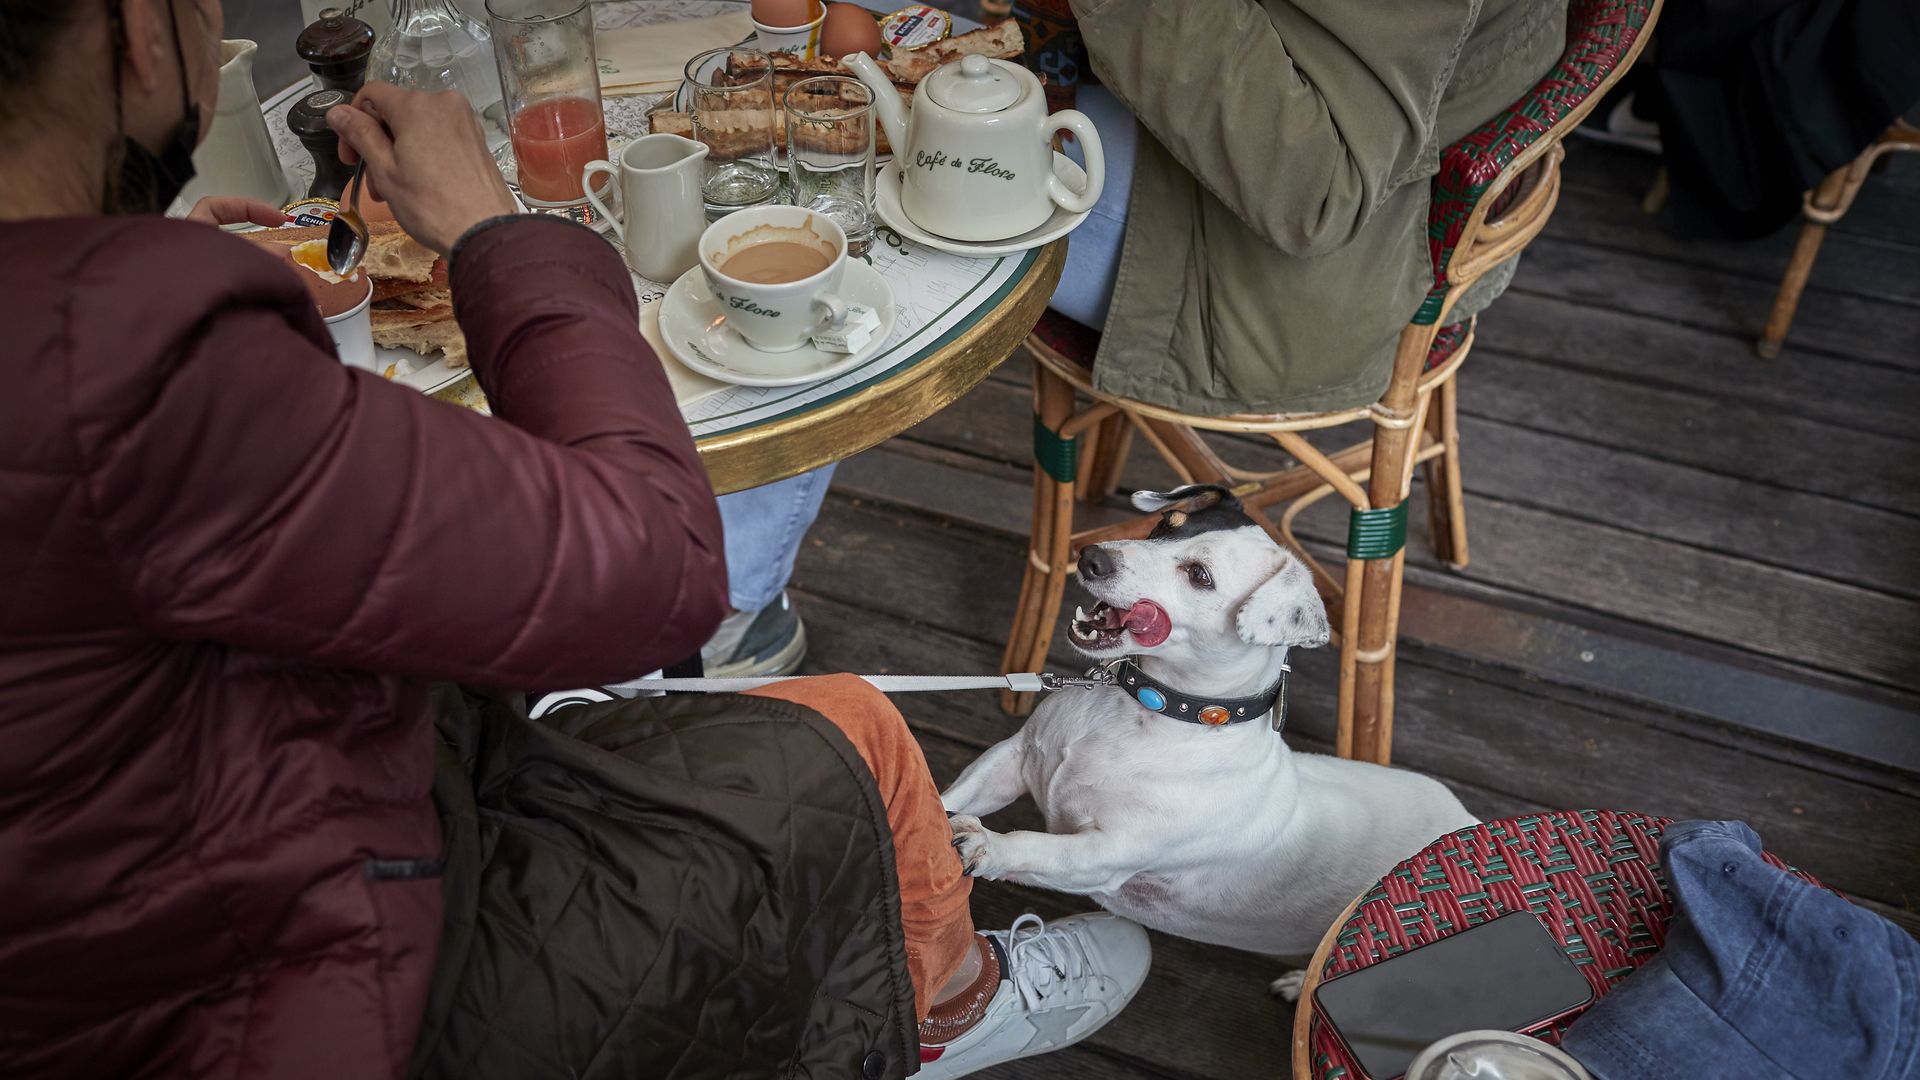 A dog looks on hungrily from the floor of an outdoor cafe as two diners have breakfast.